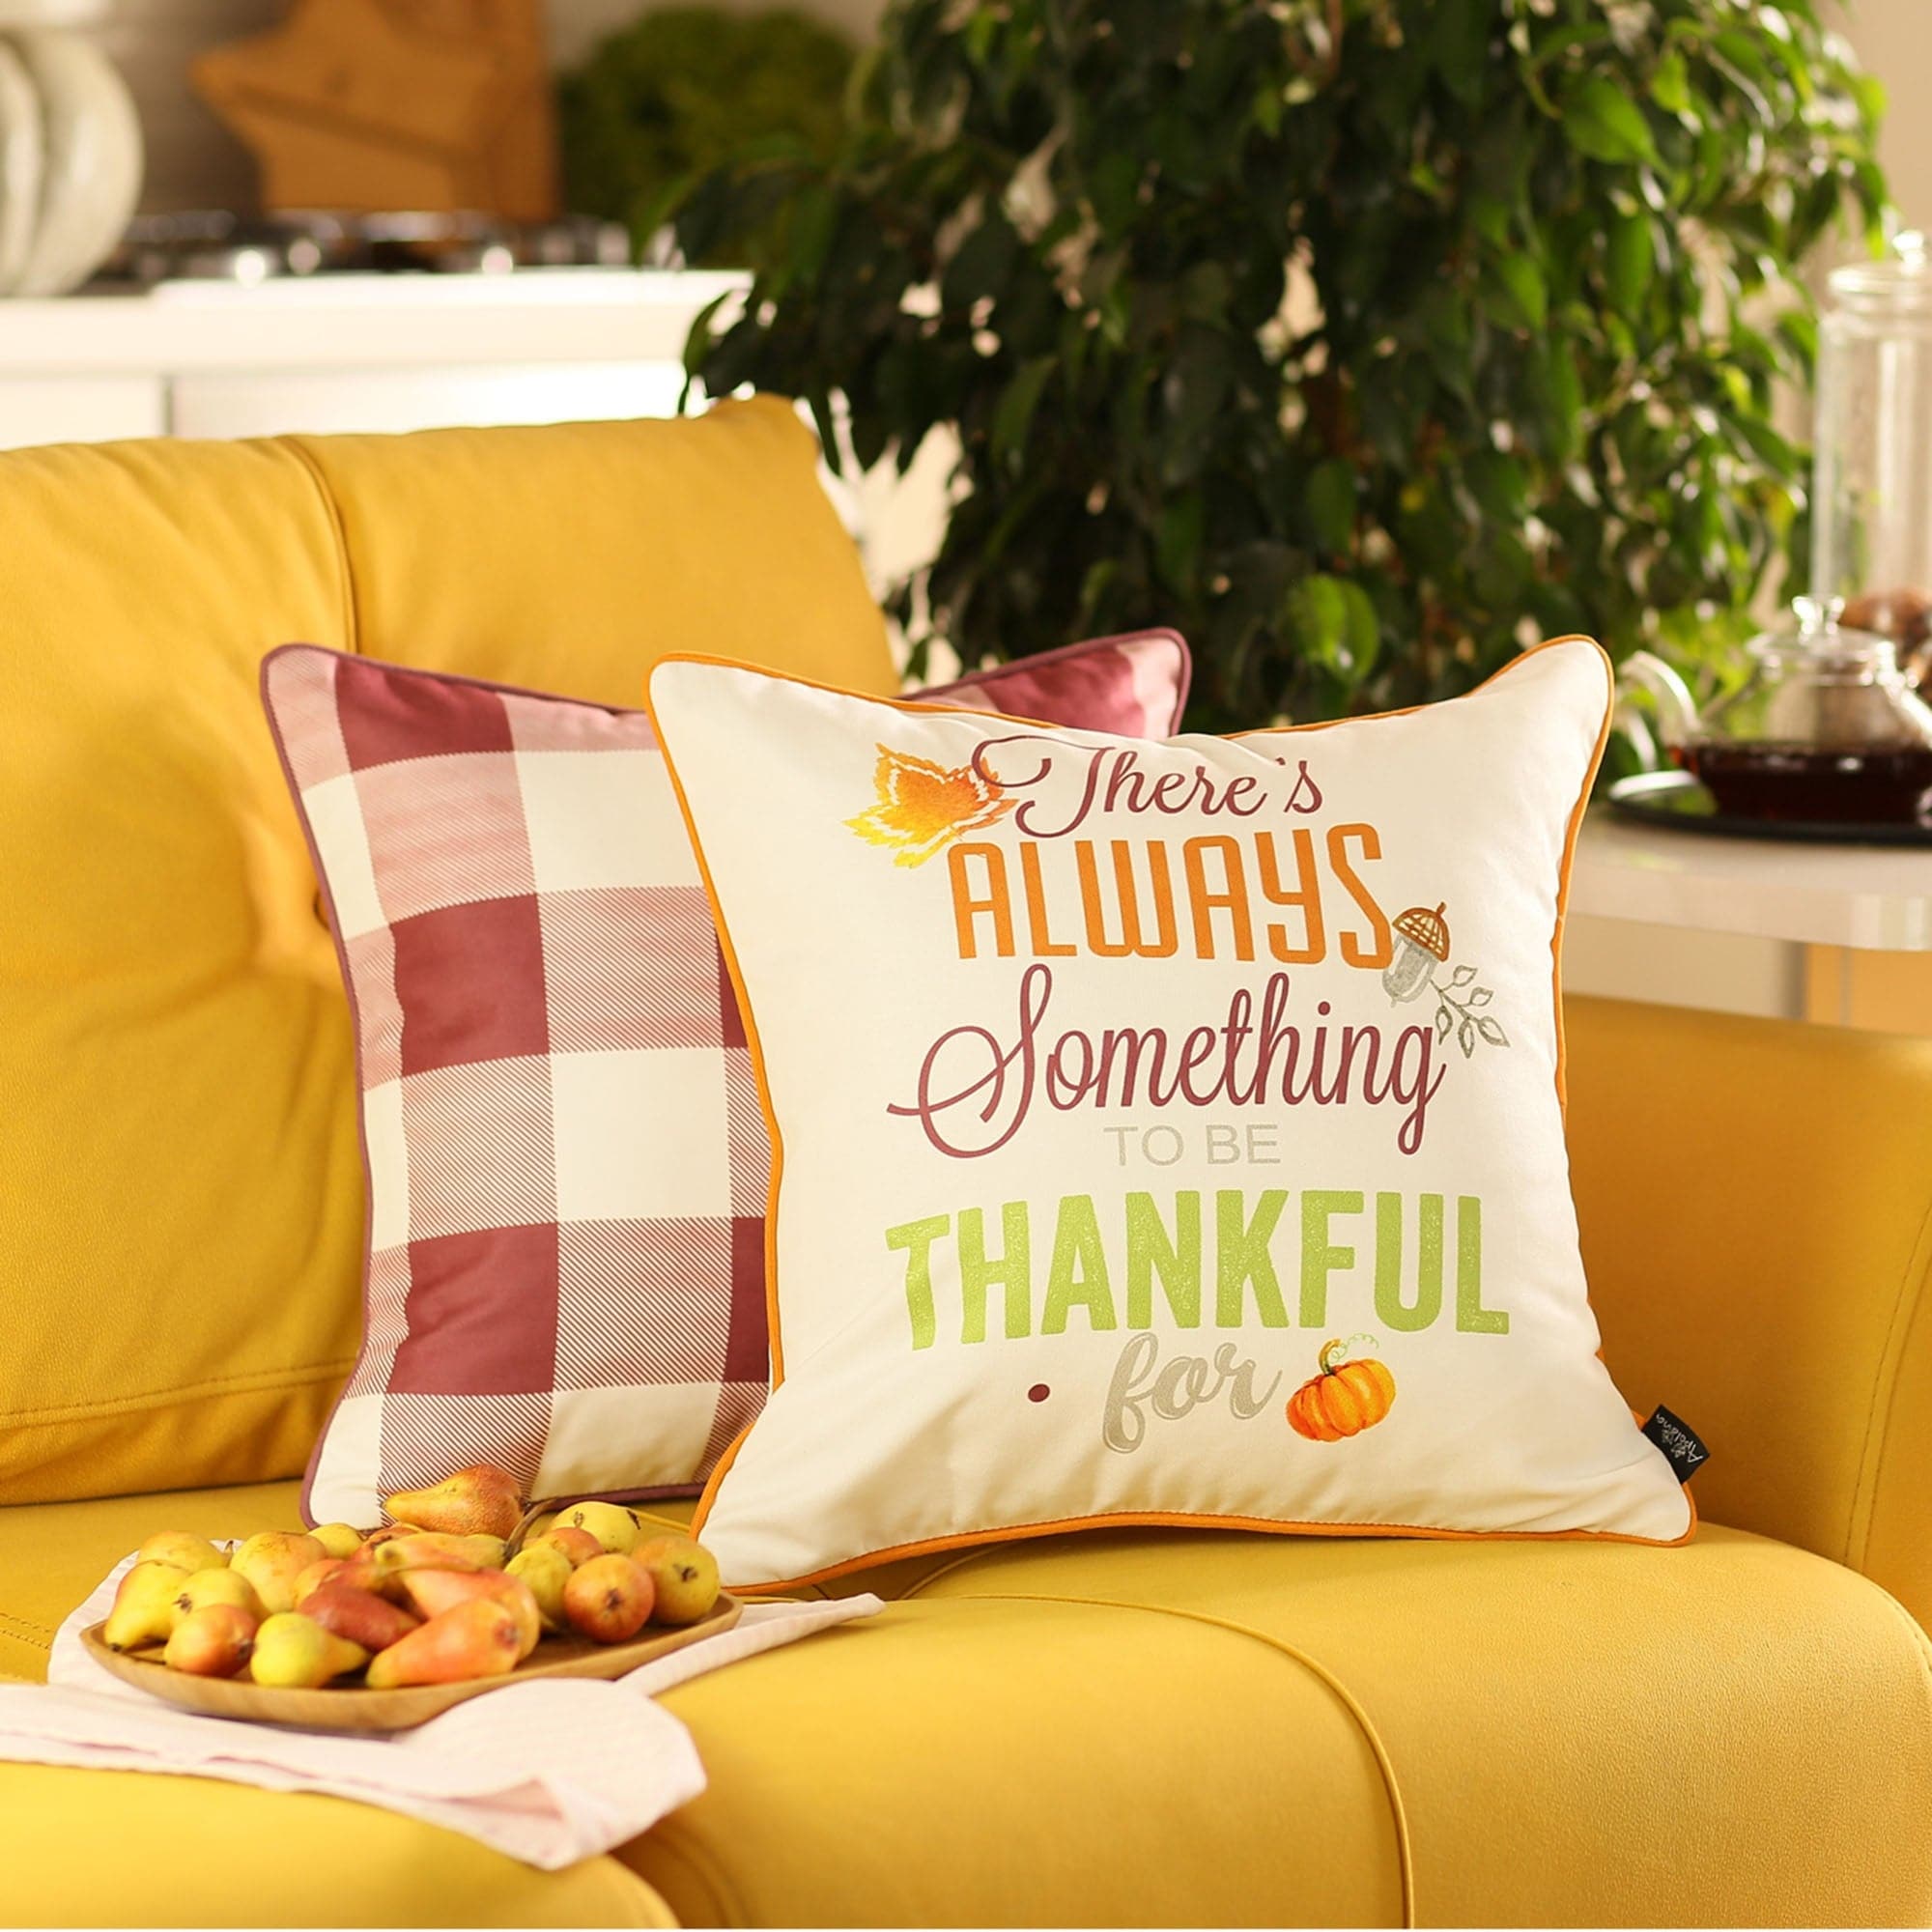 https://ak1.ostkcdn.com/images/products/is/images/direct/0b2f5650df8c885163ee6b9ca68e902df5f36221/Decorative-Fall-Thanksgiving-Throw-Pillow-Plaid-%26-Quote-Set-of-2.jpg